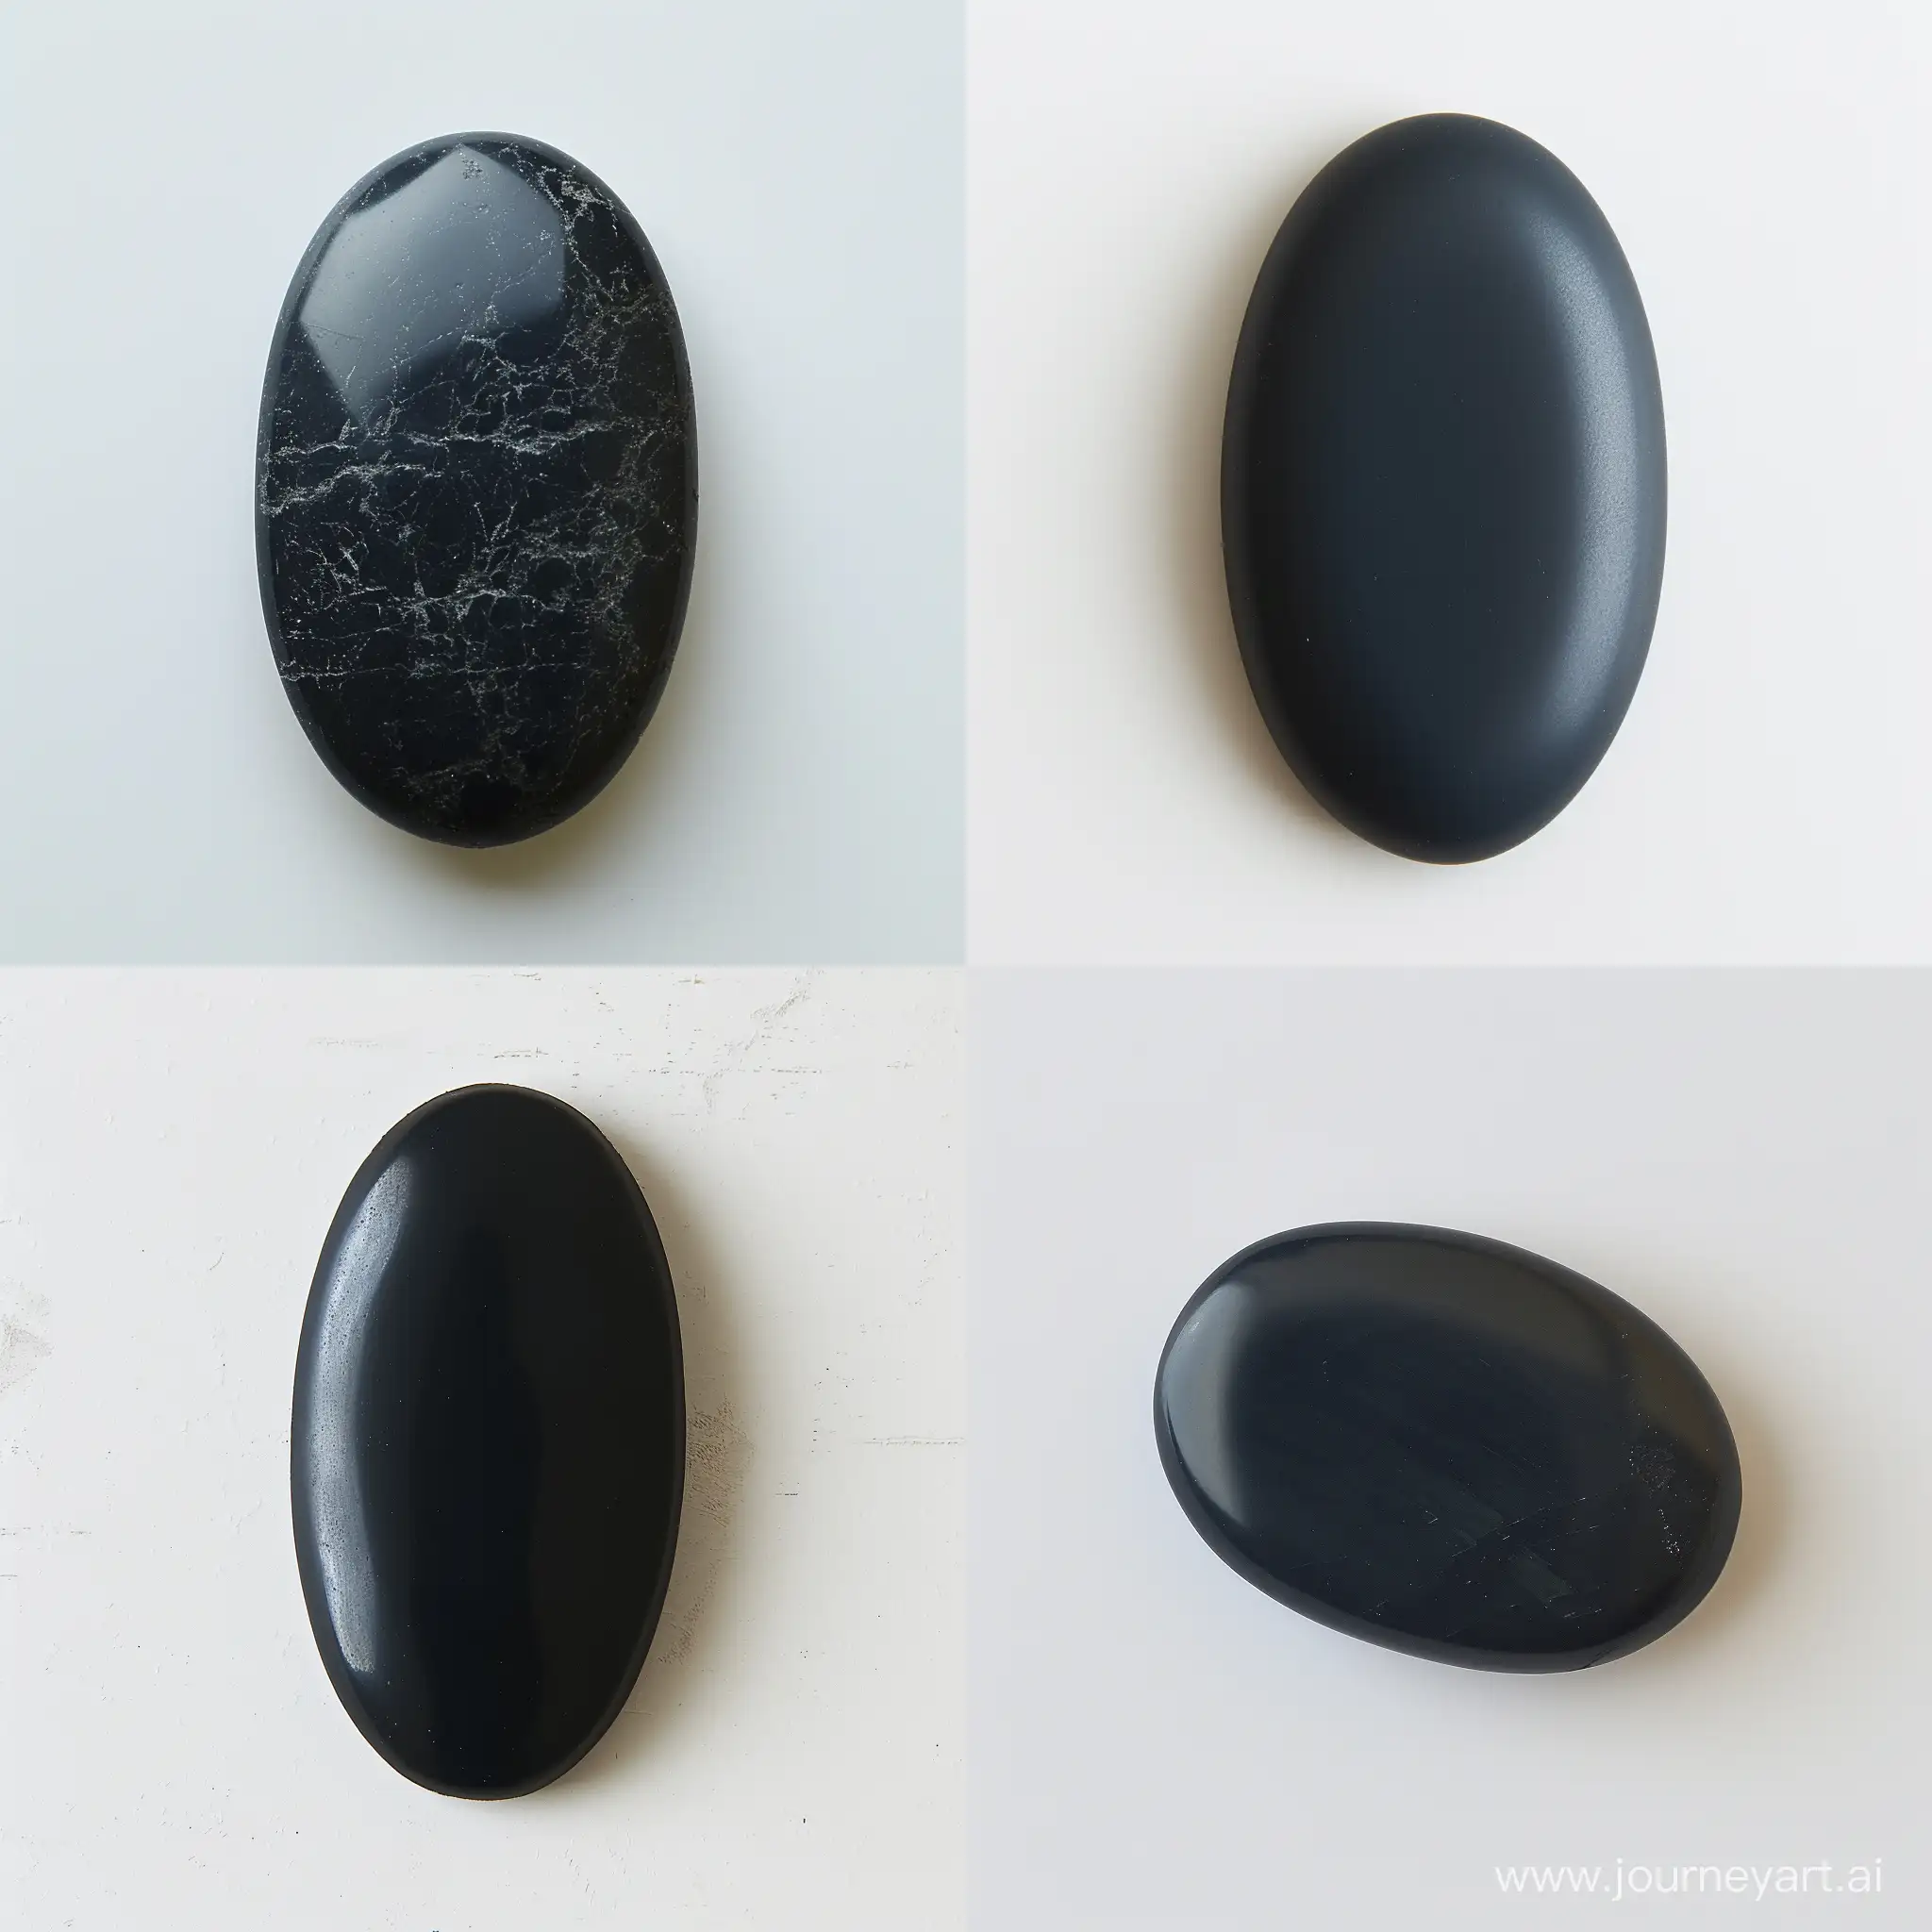 Beautiful stone one piece of oval shape dark black color matte texture monochrome slightly elongated horizontally polished cabochon of medium size on a white background view of the stone from above on a light background